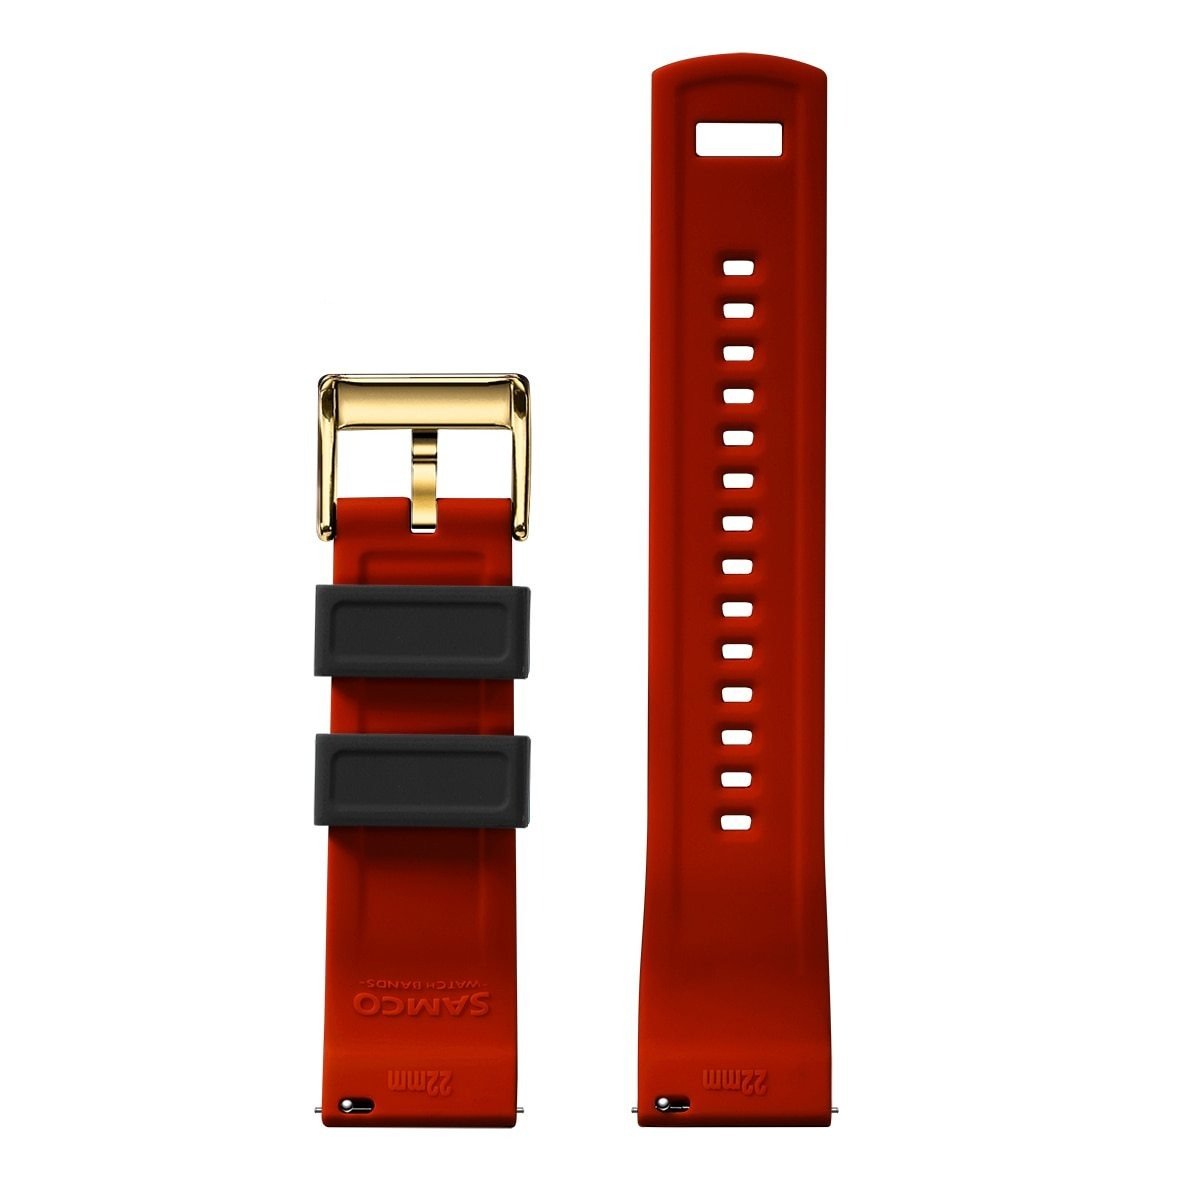 Rafael Silicone Tropic Watch Strap With Gold-Tone Tang Buckle GR 